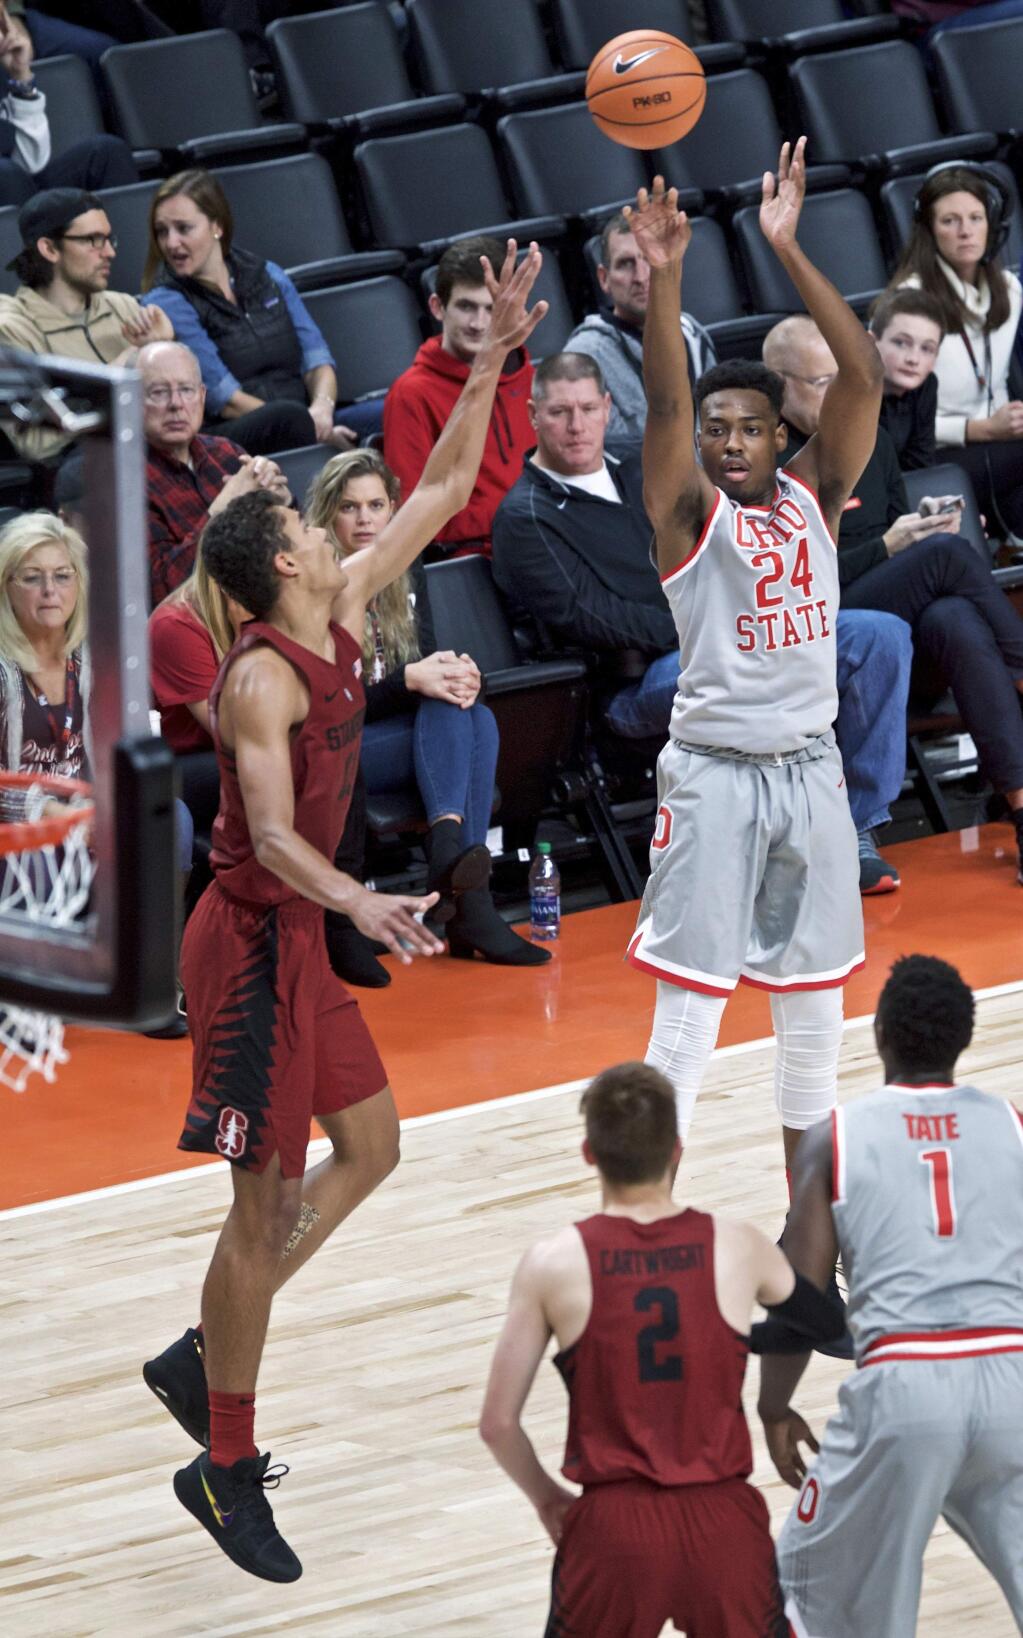 Ohio State forward Andre Wesson, right, shoots over Stanford forward Oscar da Silva during the first half of an NCAA college basketball game in the Phil Knight Invitational tournament in Portland, Ore., Friday, Nov. 24, 2017. (AP Photo/Craig Mitchelldyer)